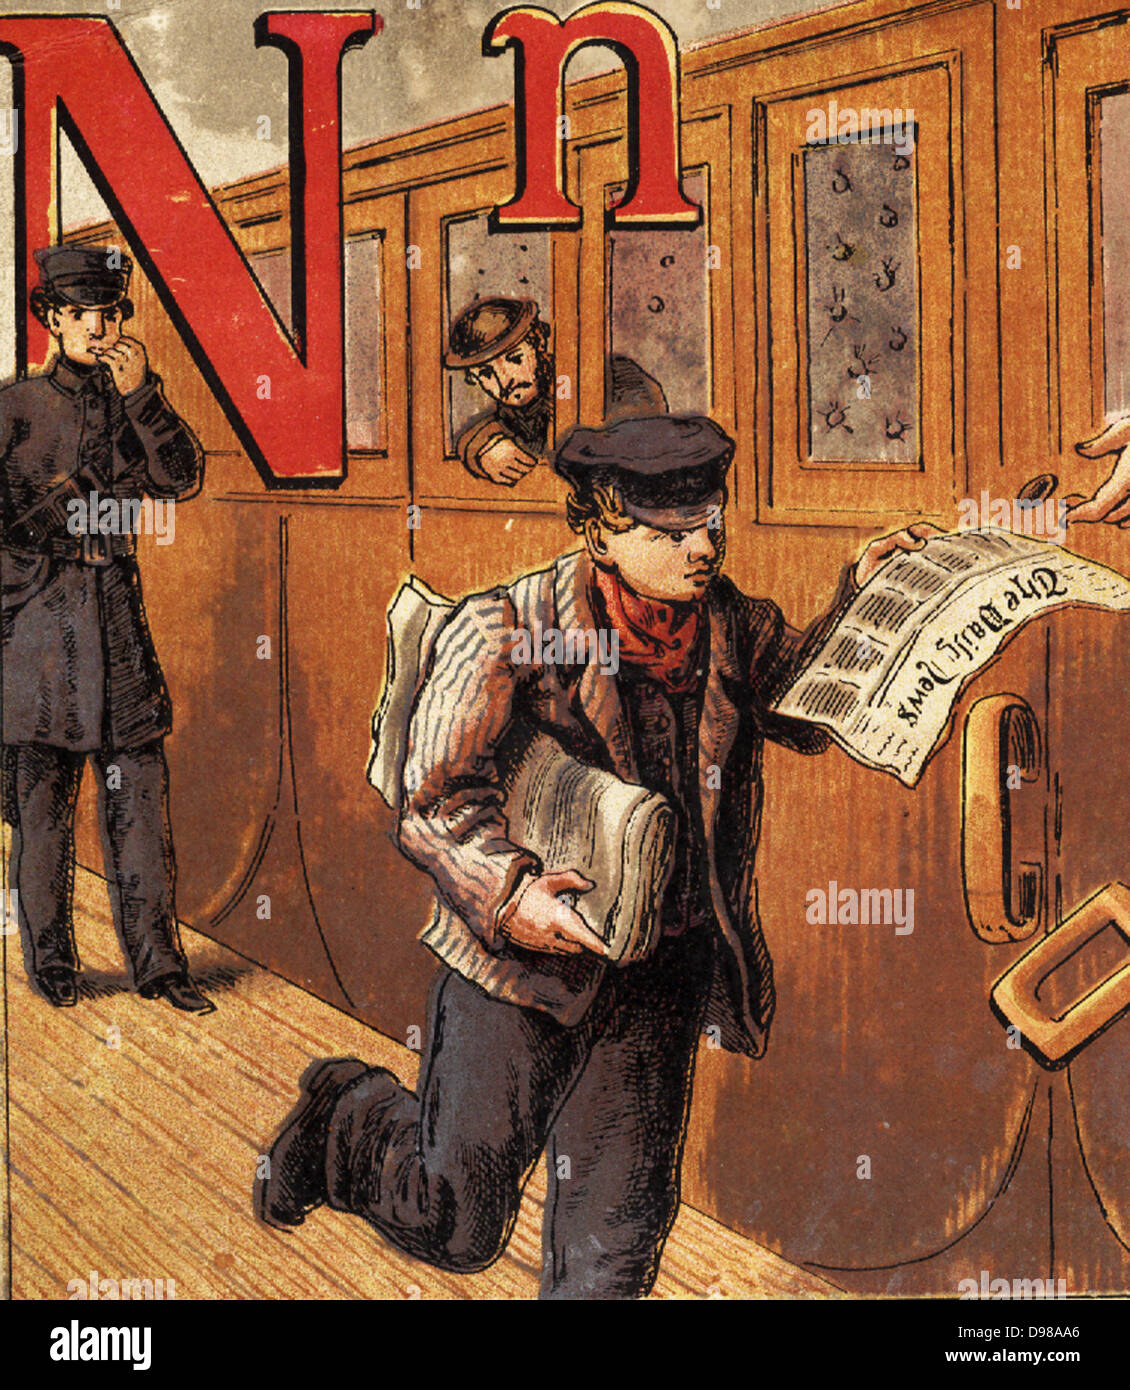 Newsboy running along the platform and selling papers to passengers on a railway train. 19th century chromolithograph. Stock Photo